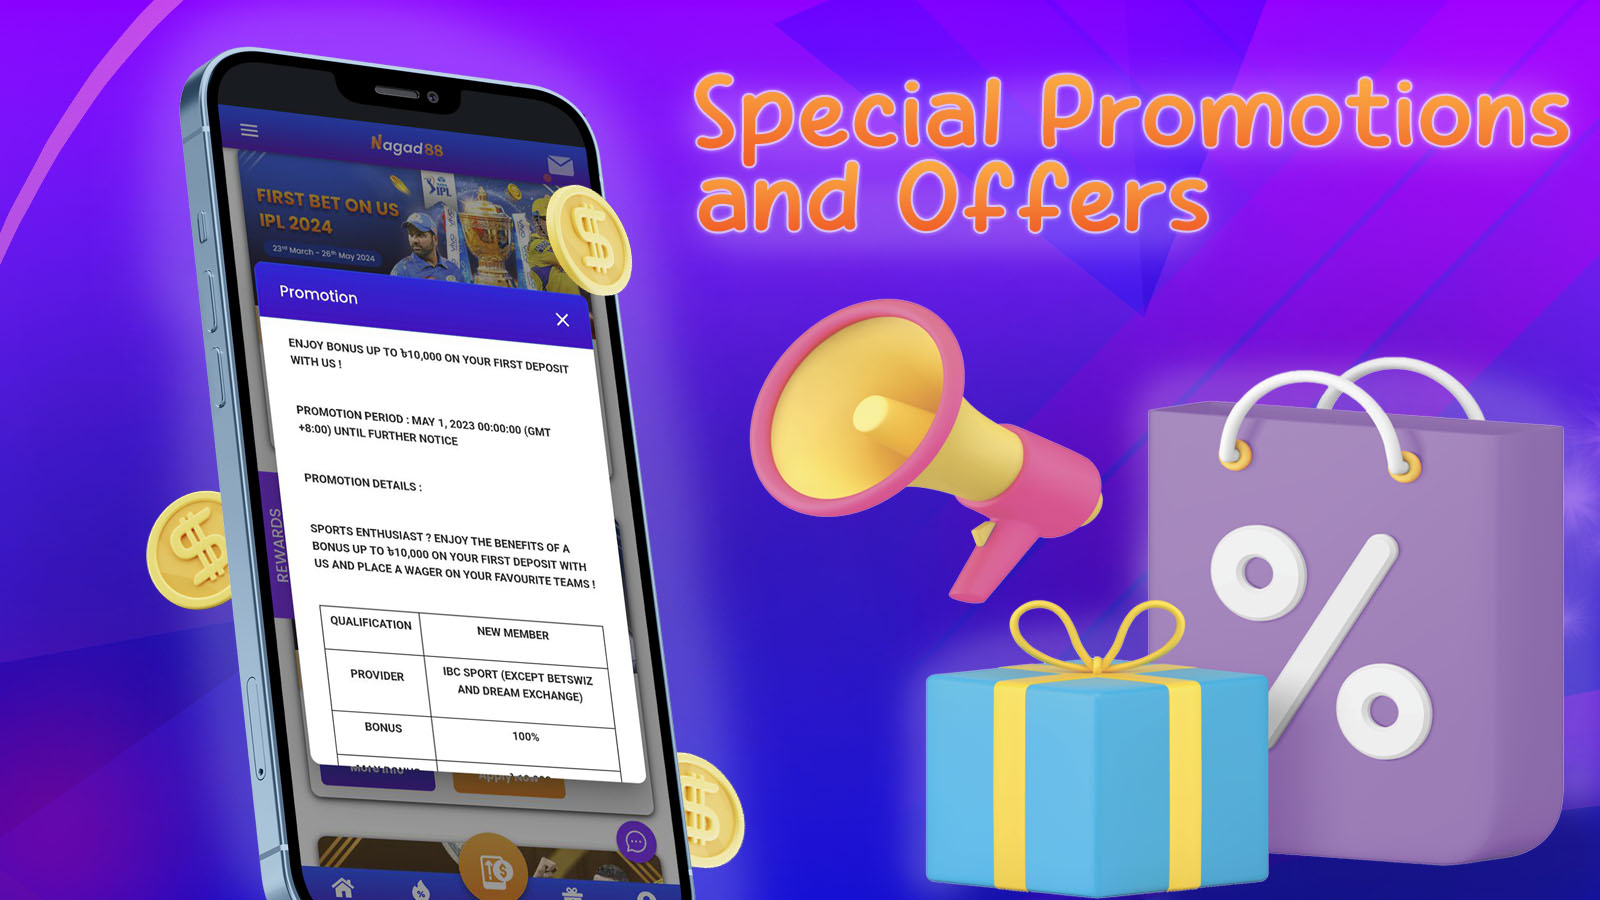 Regular special offers and promotions from Nagad88